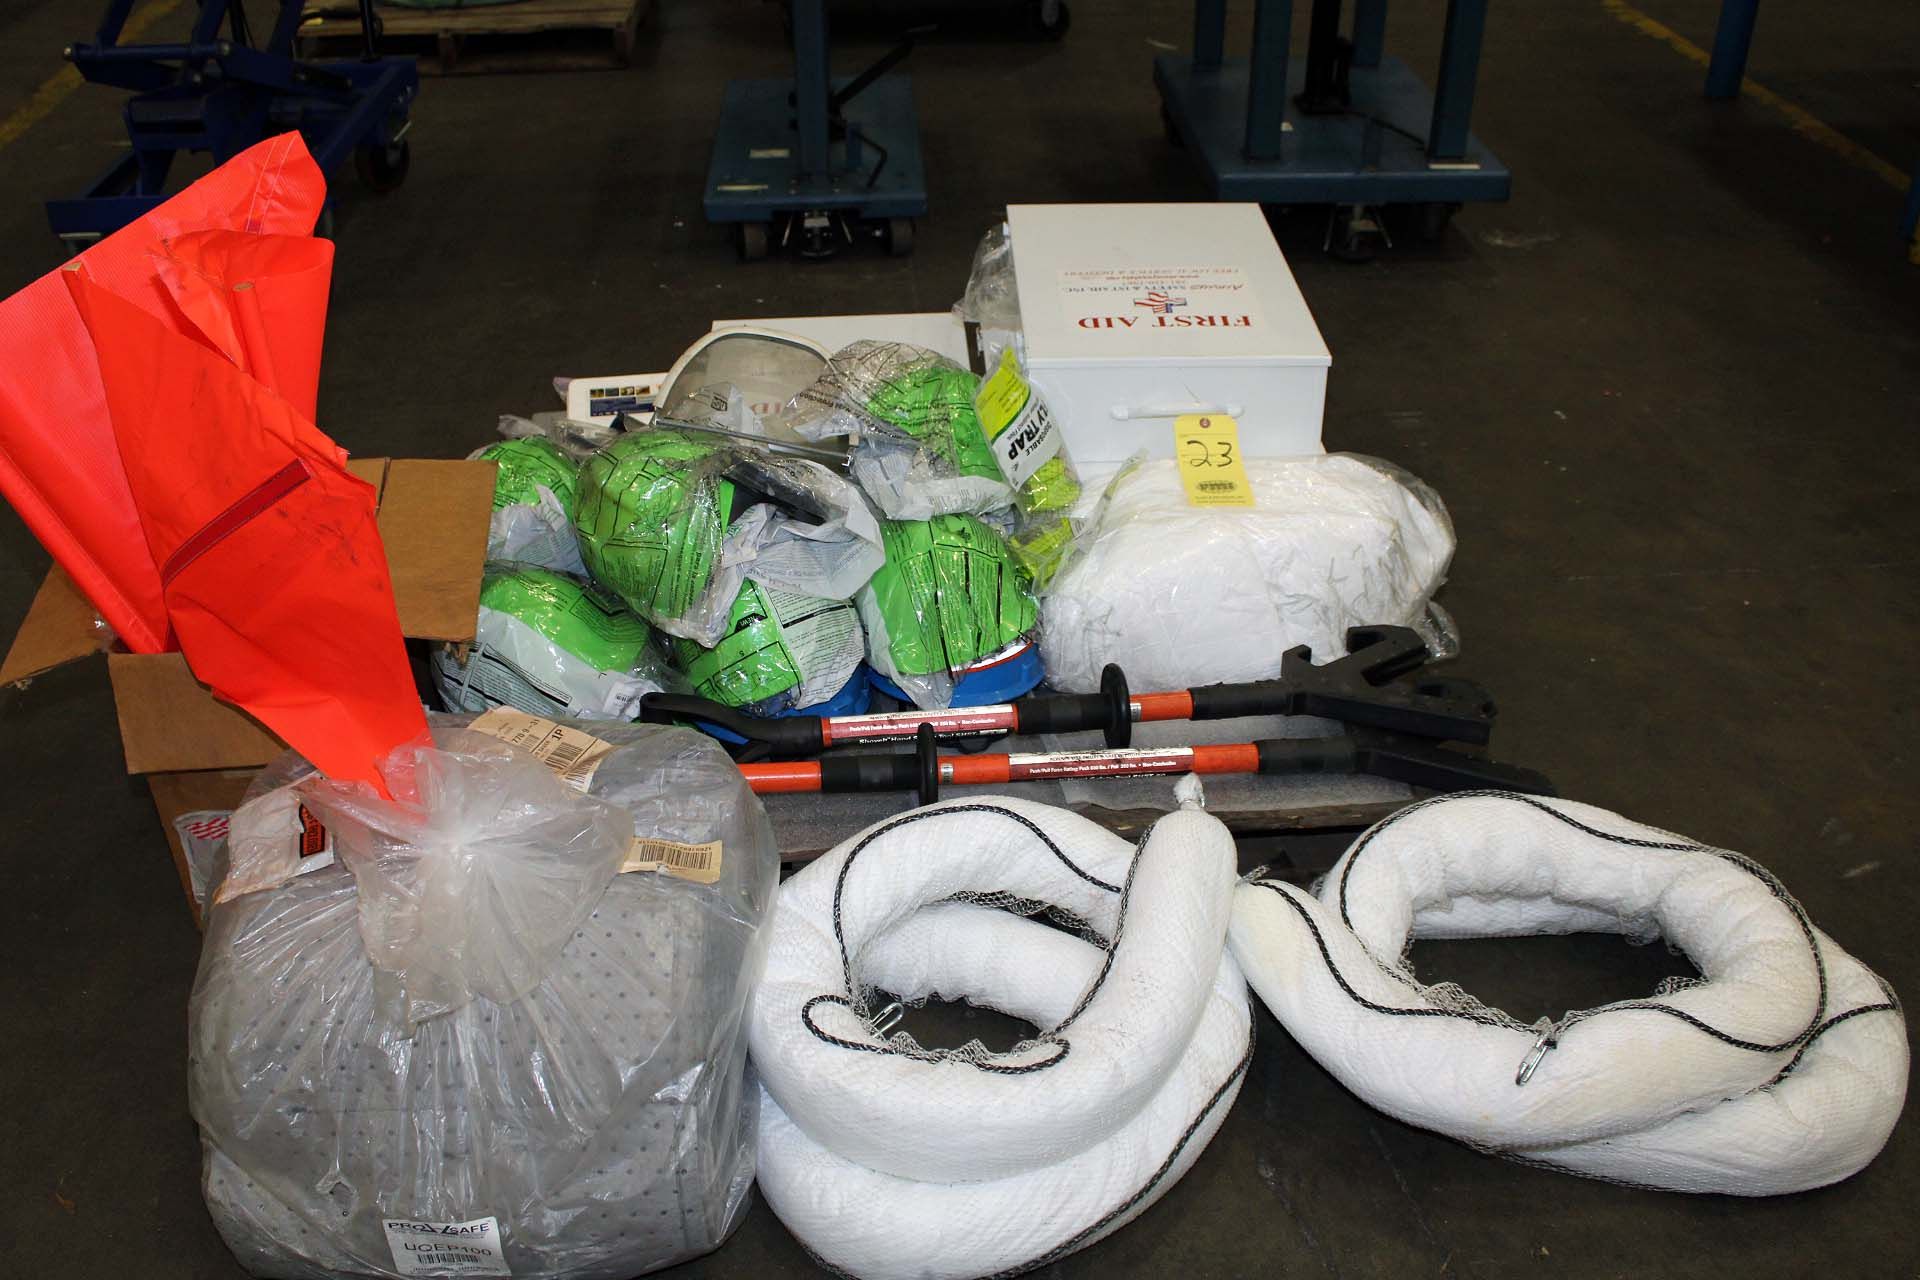 LOT OF PPE ITEMS: liquid spill containment items & first aid cabinets